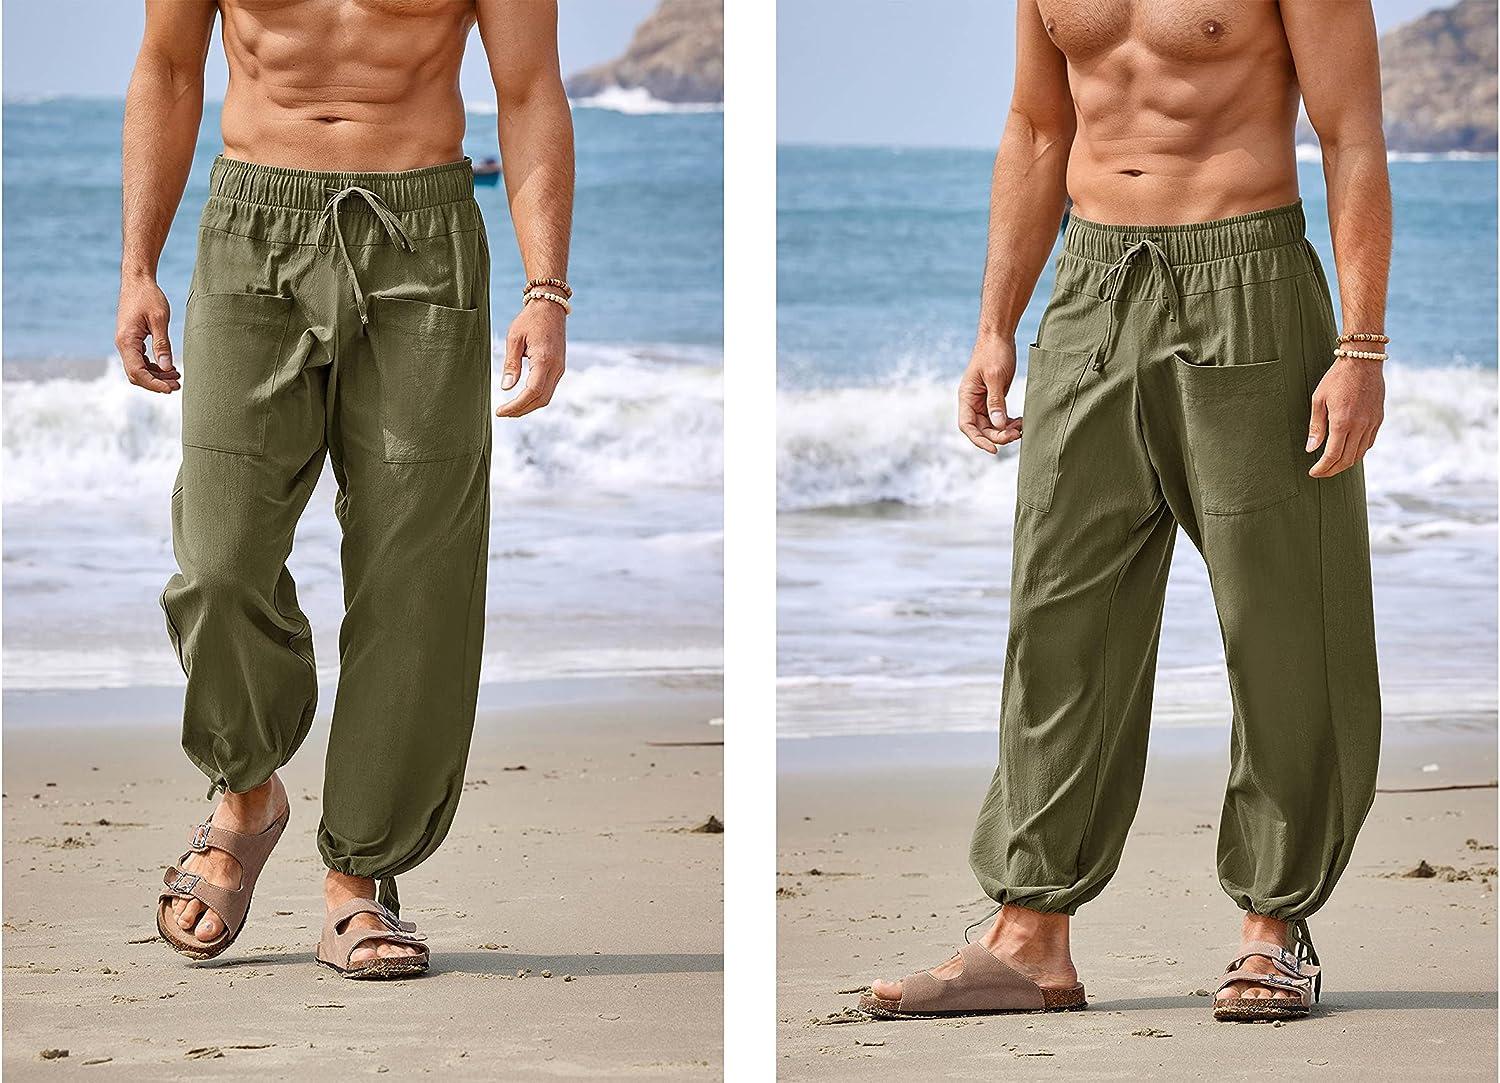 Wide Mens Linen Palazzo Pants With Pleats, High-waist Wide Linen Joggers,  Mens Trousers, Loose Fit Pants, Baggy Pants -  Canada